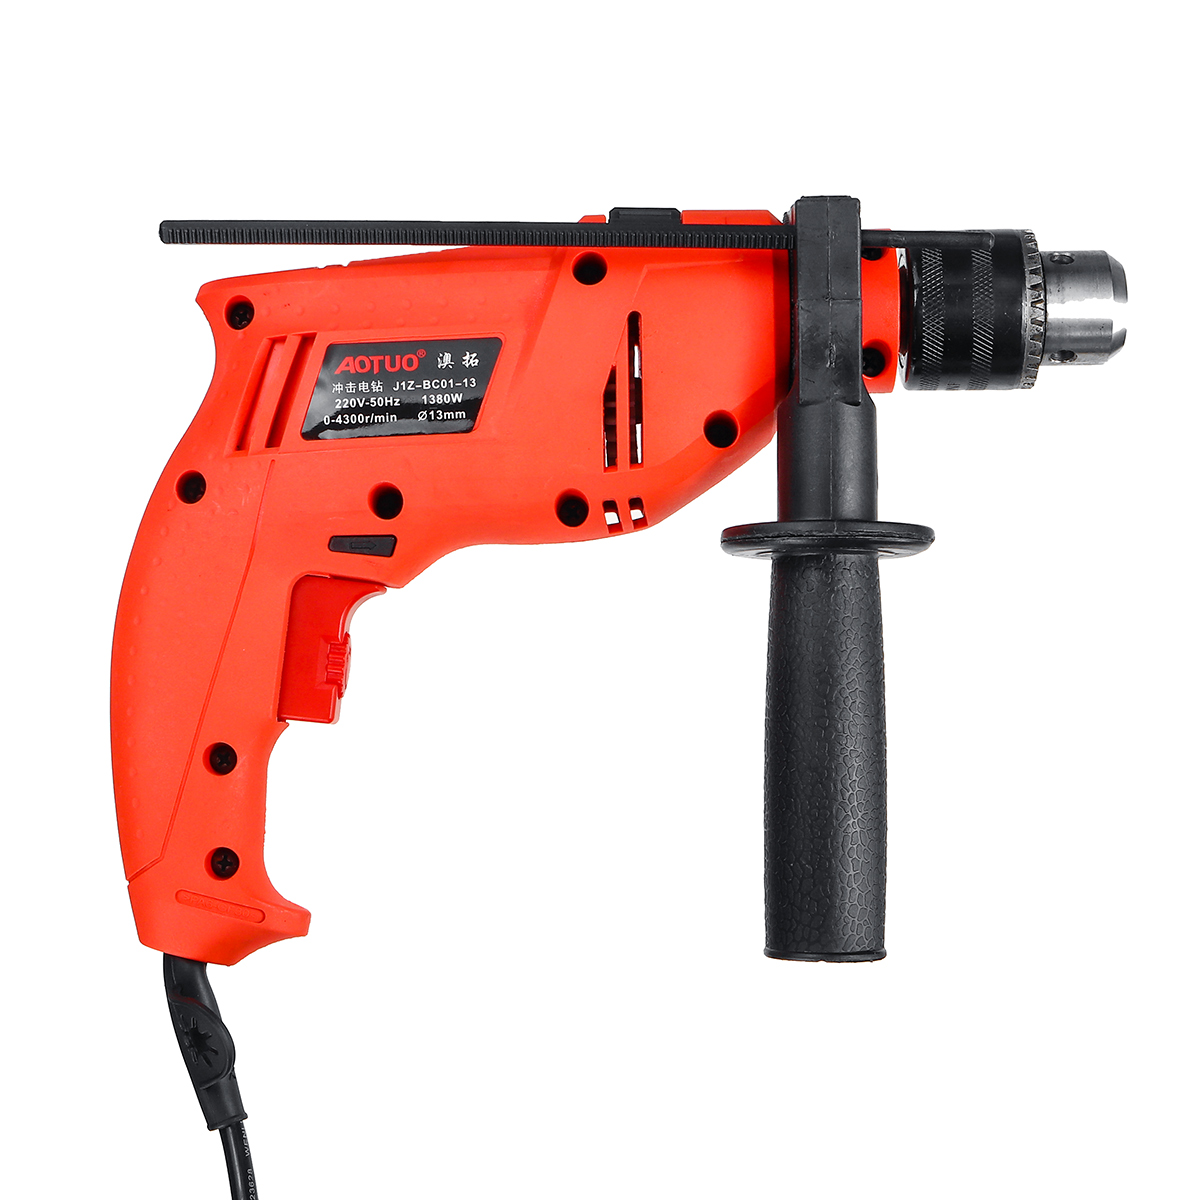 

Powerful Electric Hand Hammer Drill 2 in 1 710W 220V Variable Speed Heavy Duty Impact Screwdriver 3300r/min Adjustable